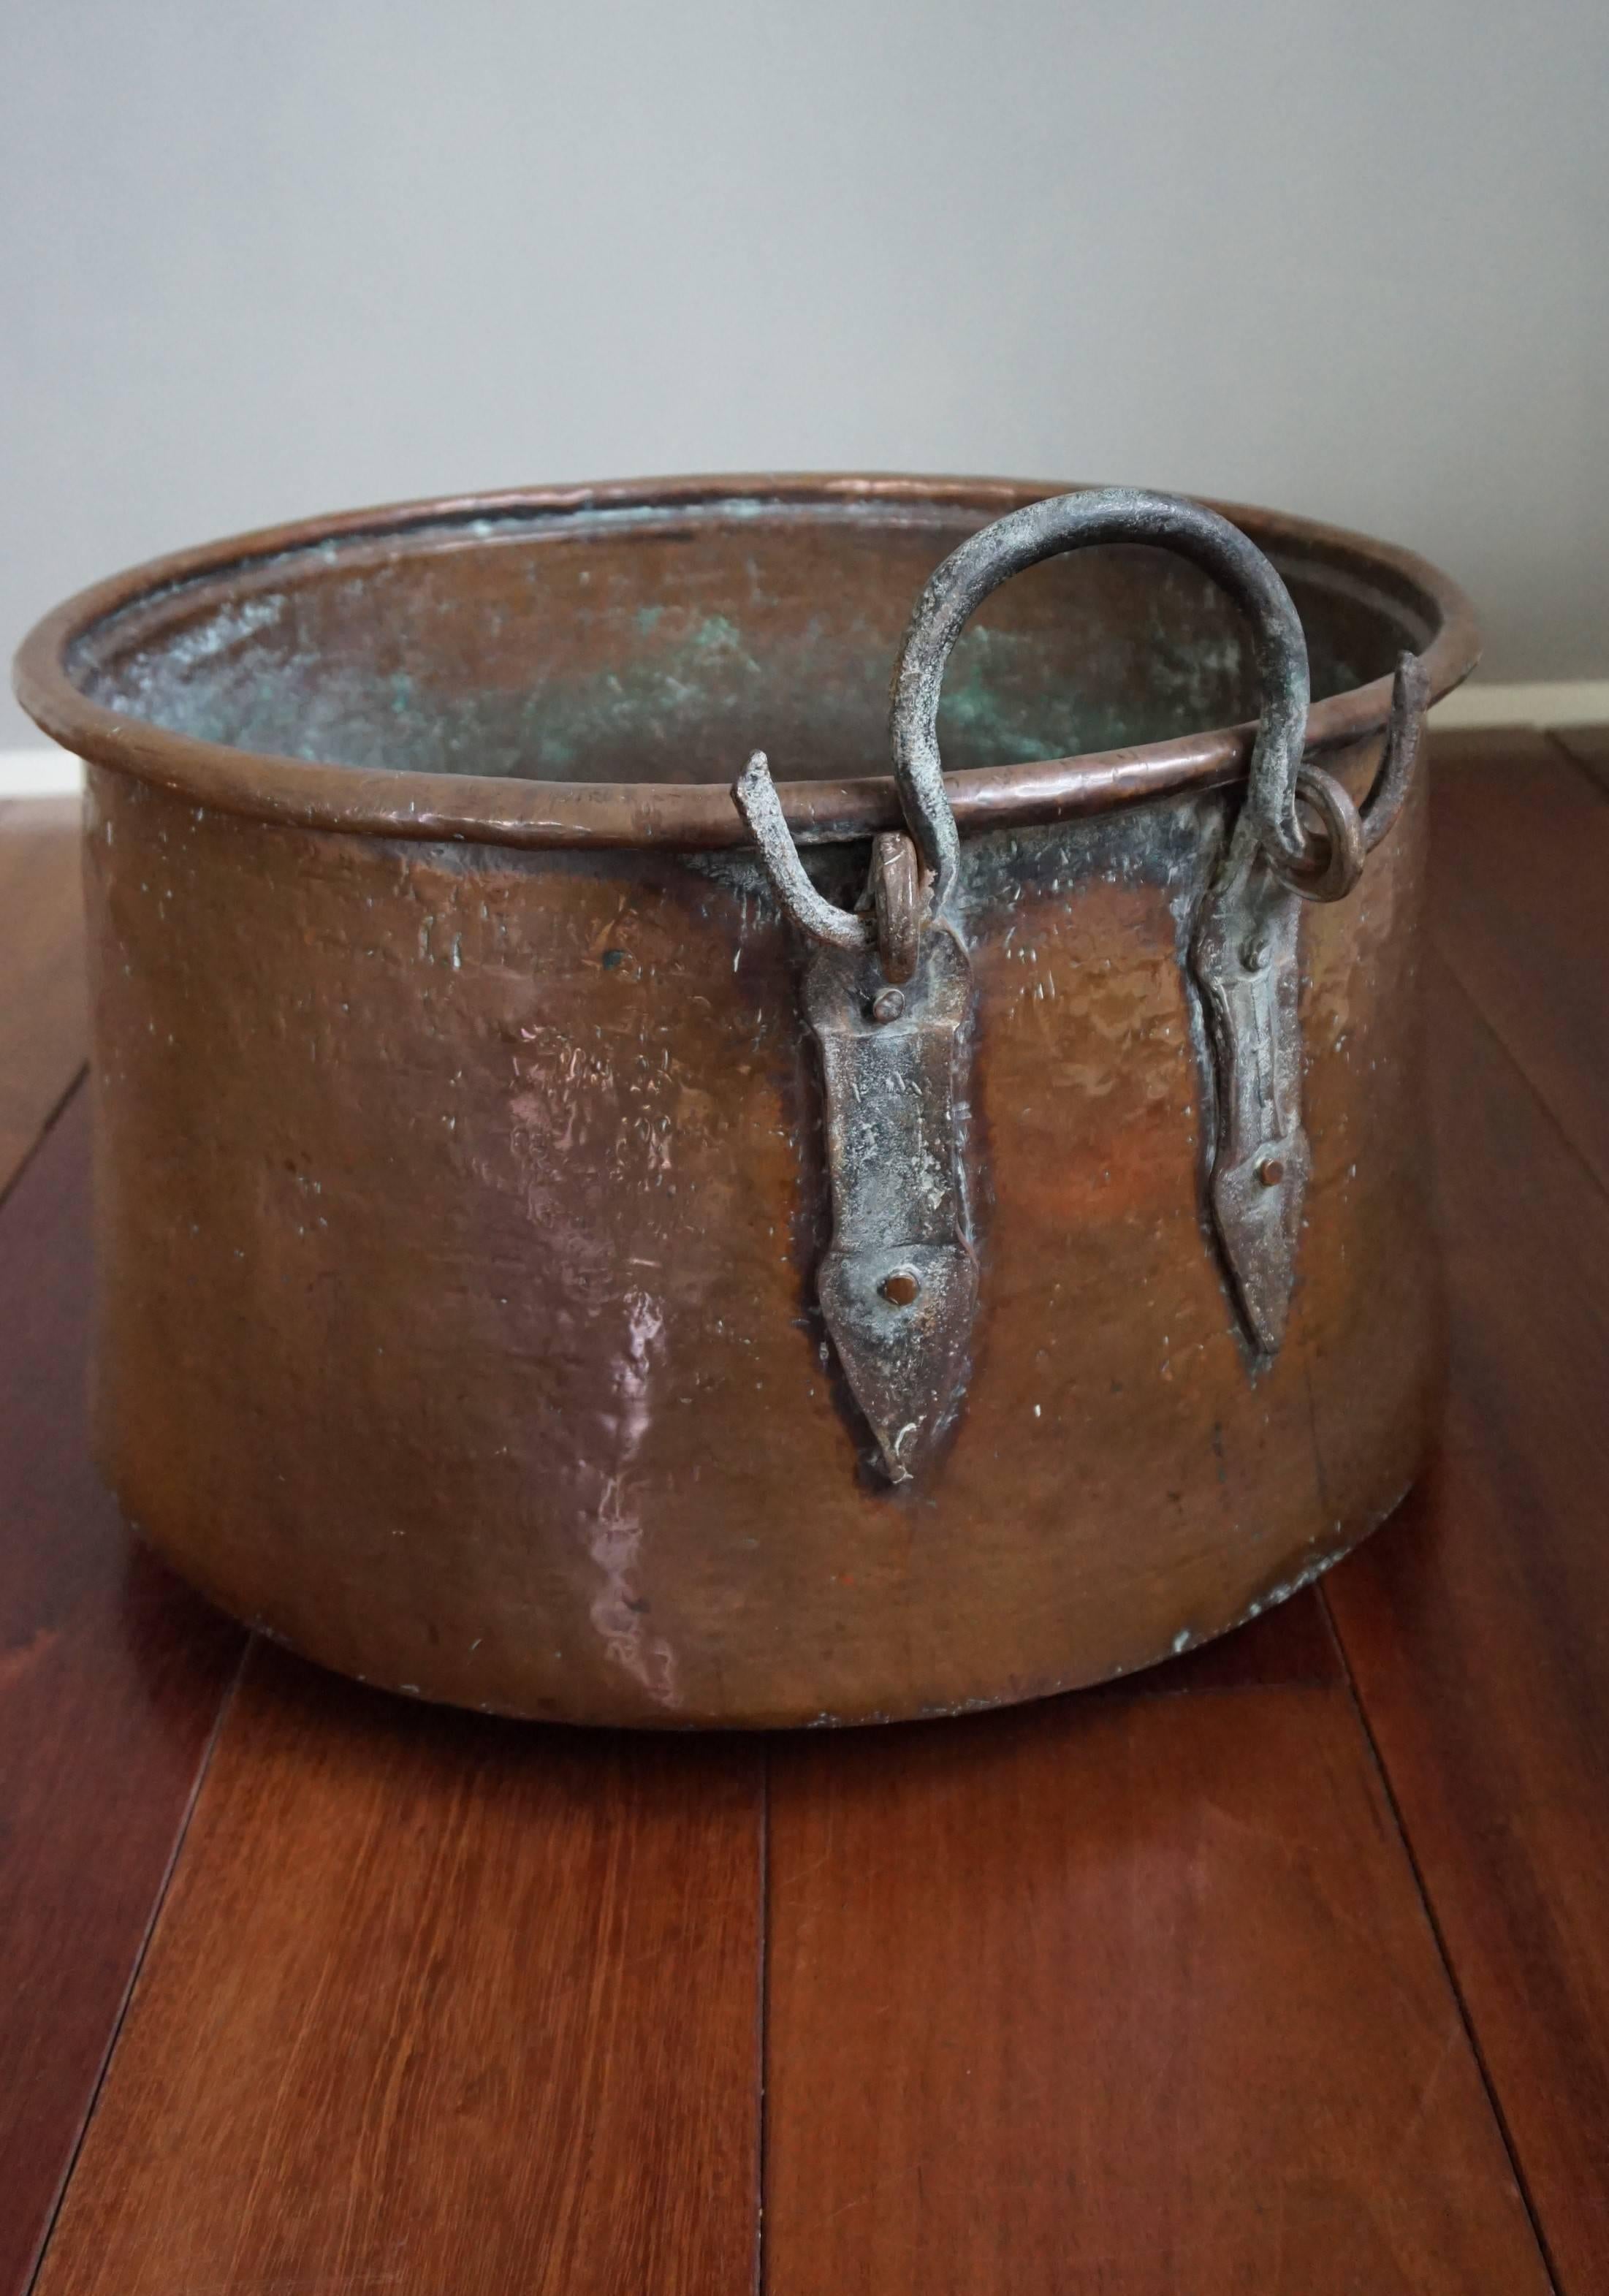 Brass Antique, Large & Decorative Hand Hammered Copper & Wrought Iron Firewood Bucket